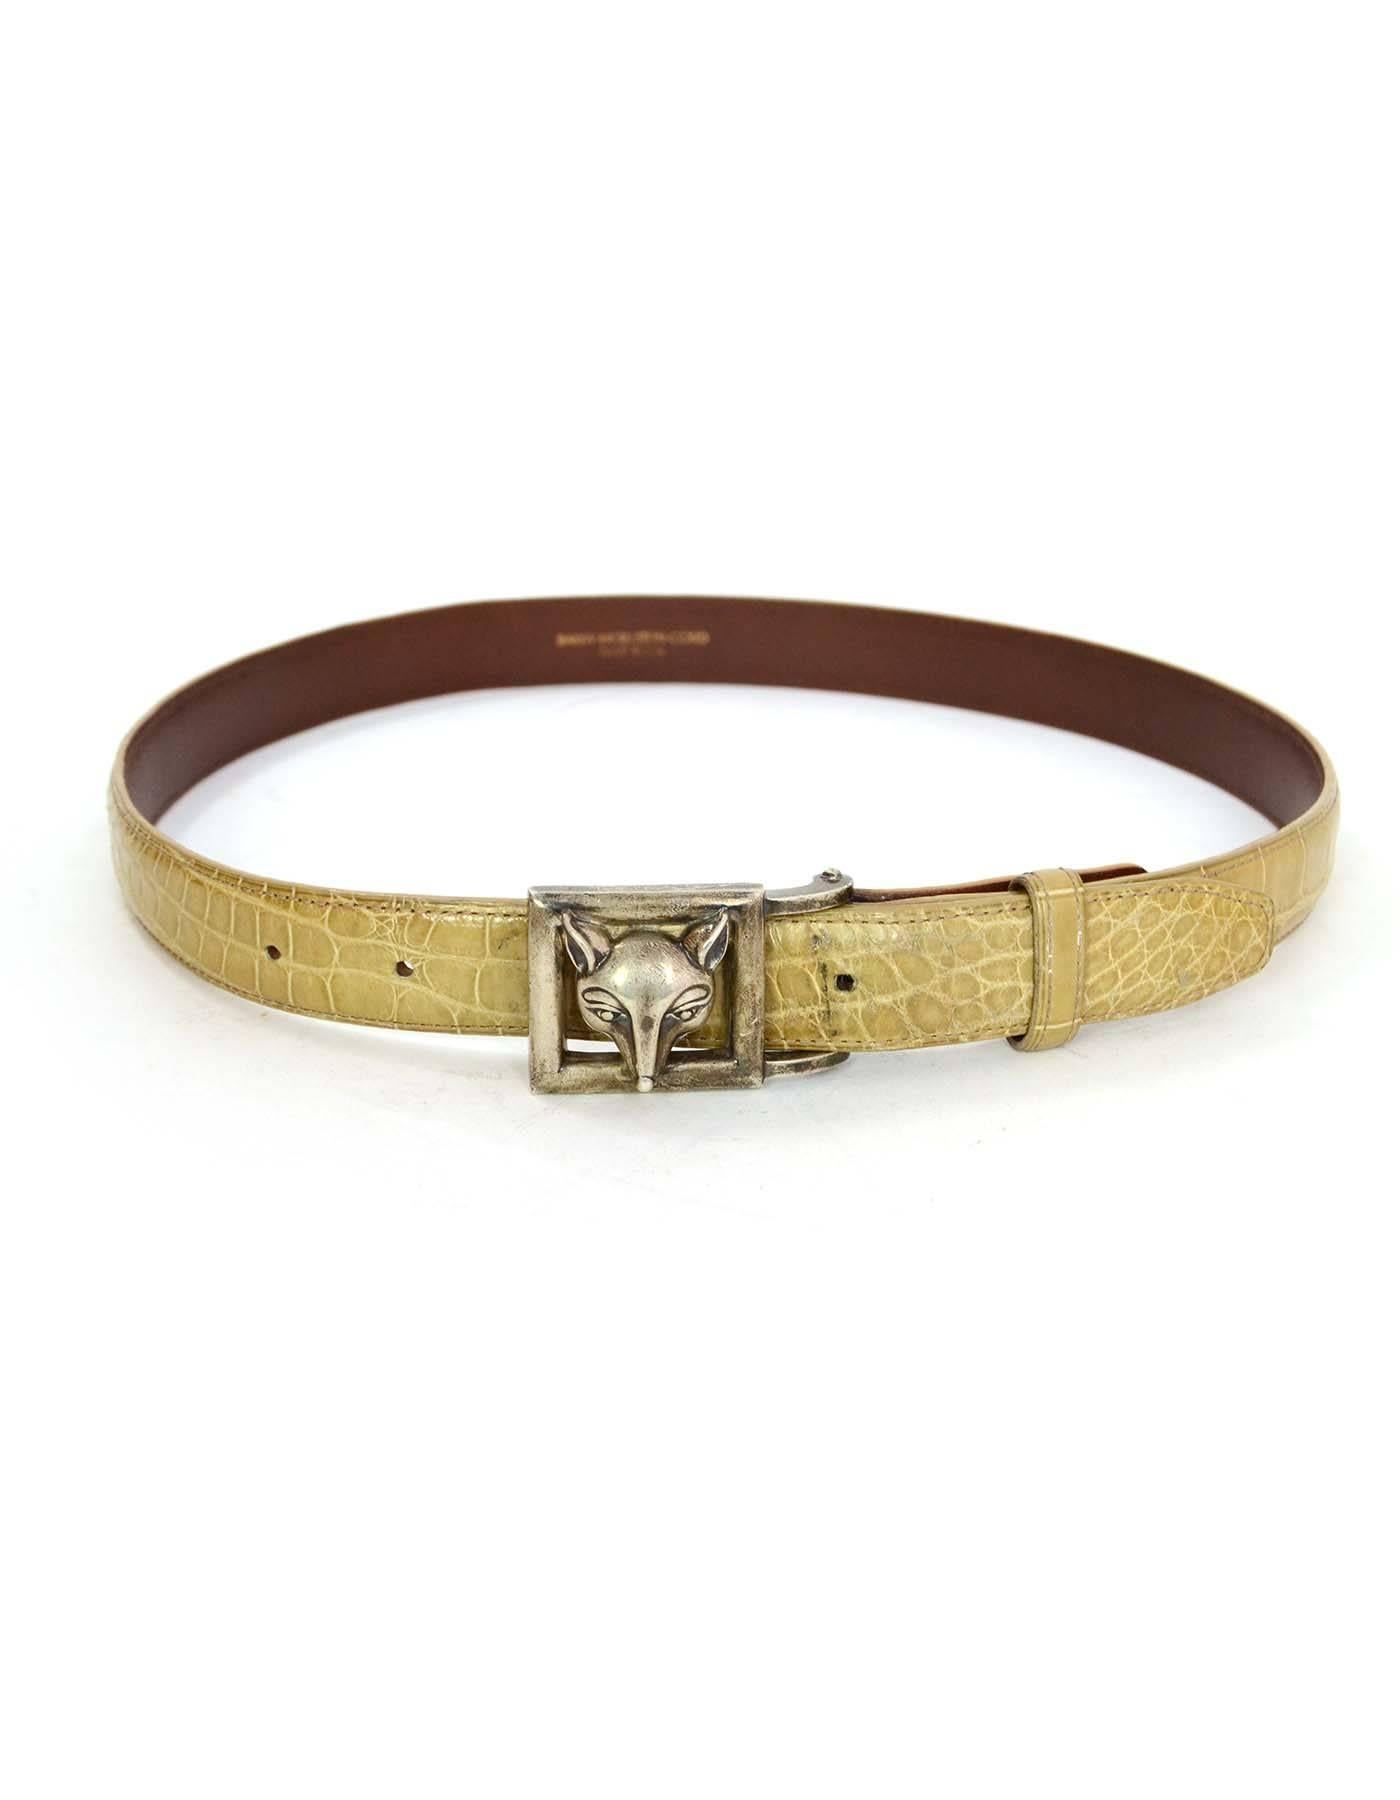 Kieselstein-Cord Alligator Skin Belt Strap
**Note: Does NOT include belt buckle**
Color: Beige & brown
Hardware: Black and silvertone
Materials: Alligator skin and leather
Closure/Opening: Double snap button closure
Stamp: Kieselstein-Cord New